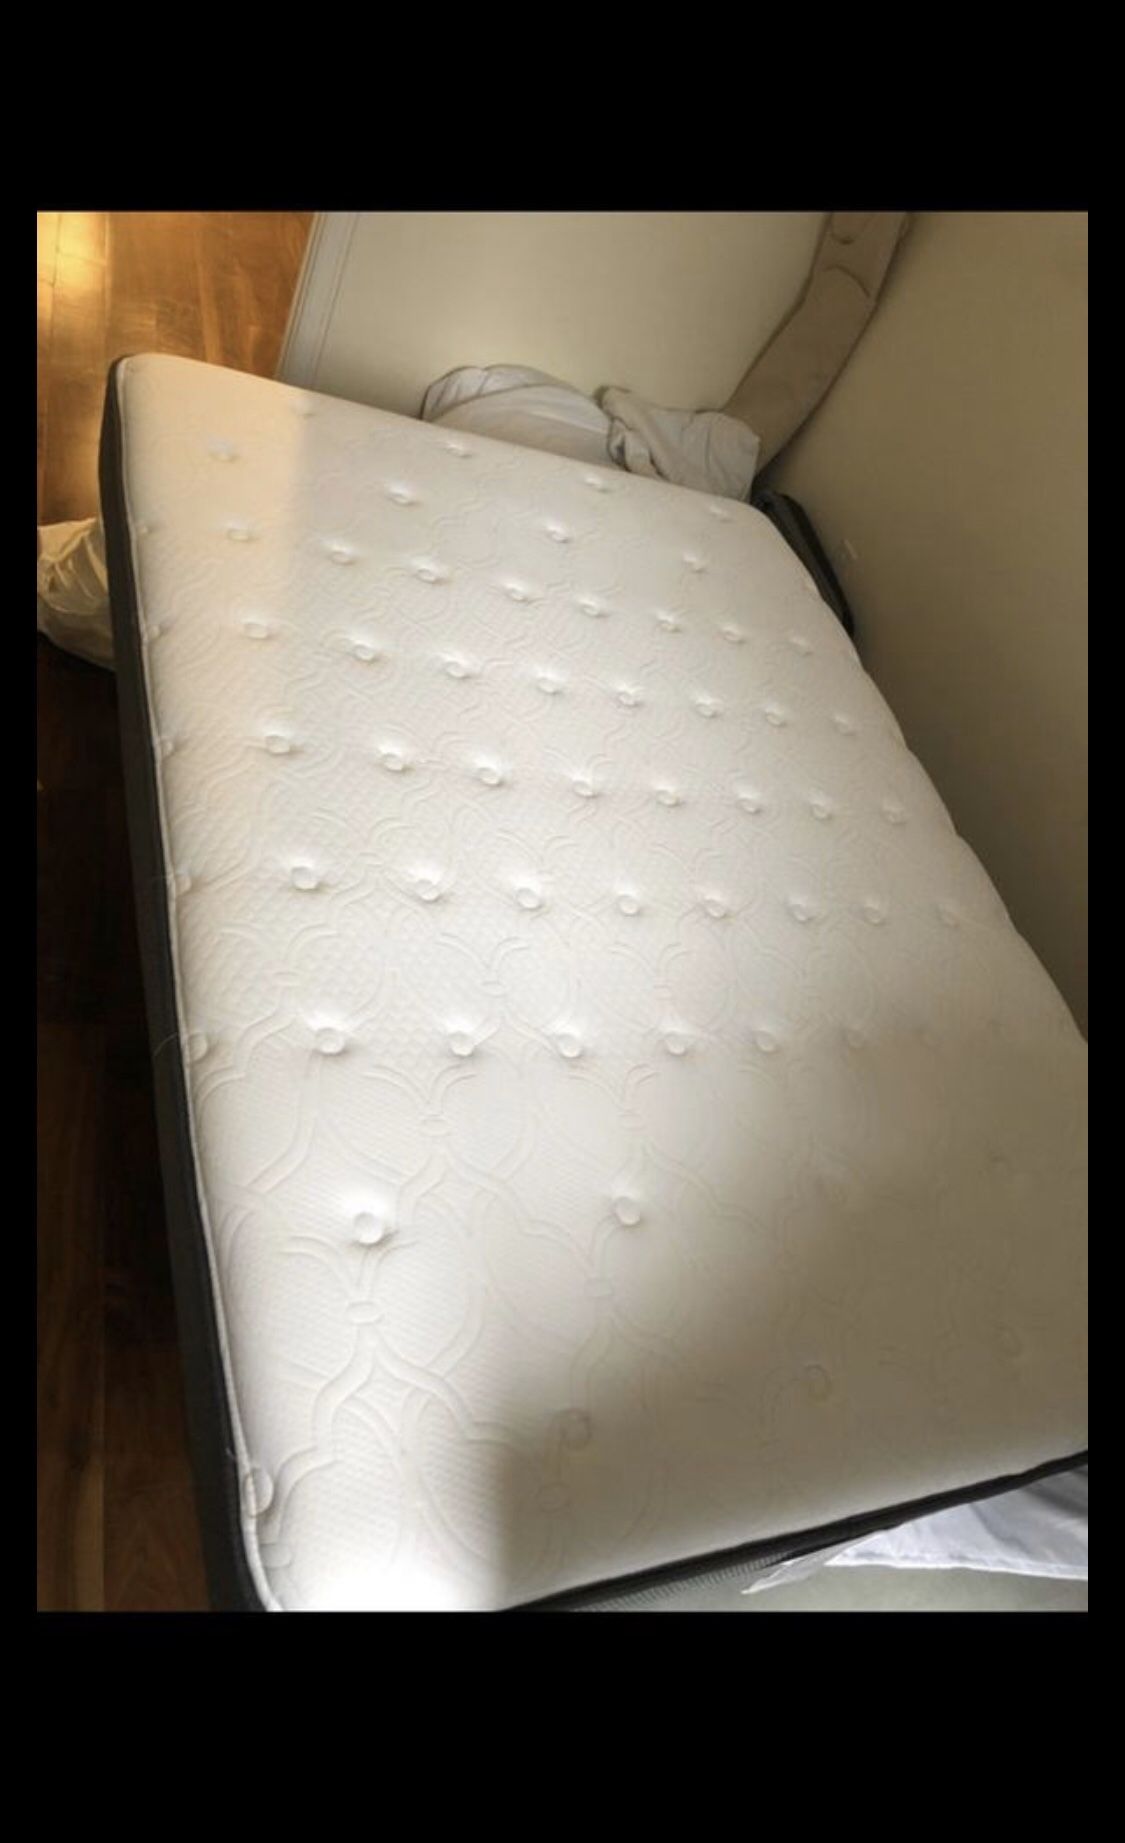 Sealy Posturepedic Full mattress PLUS BOX SPRING AND BED FRAME.